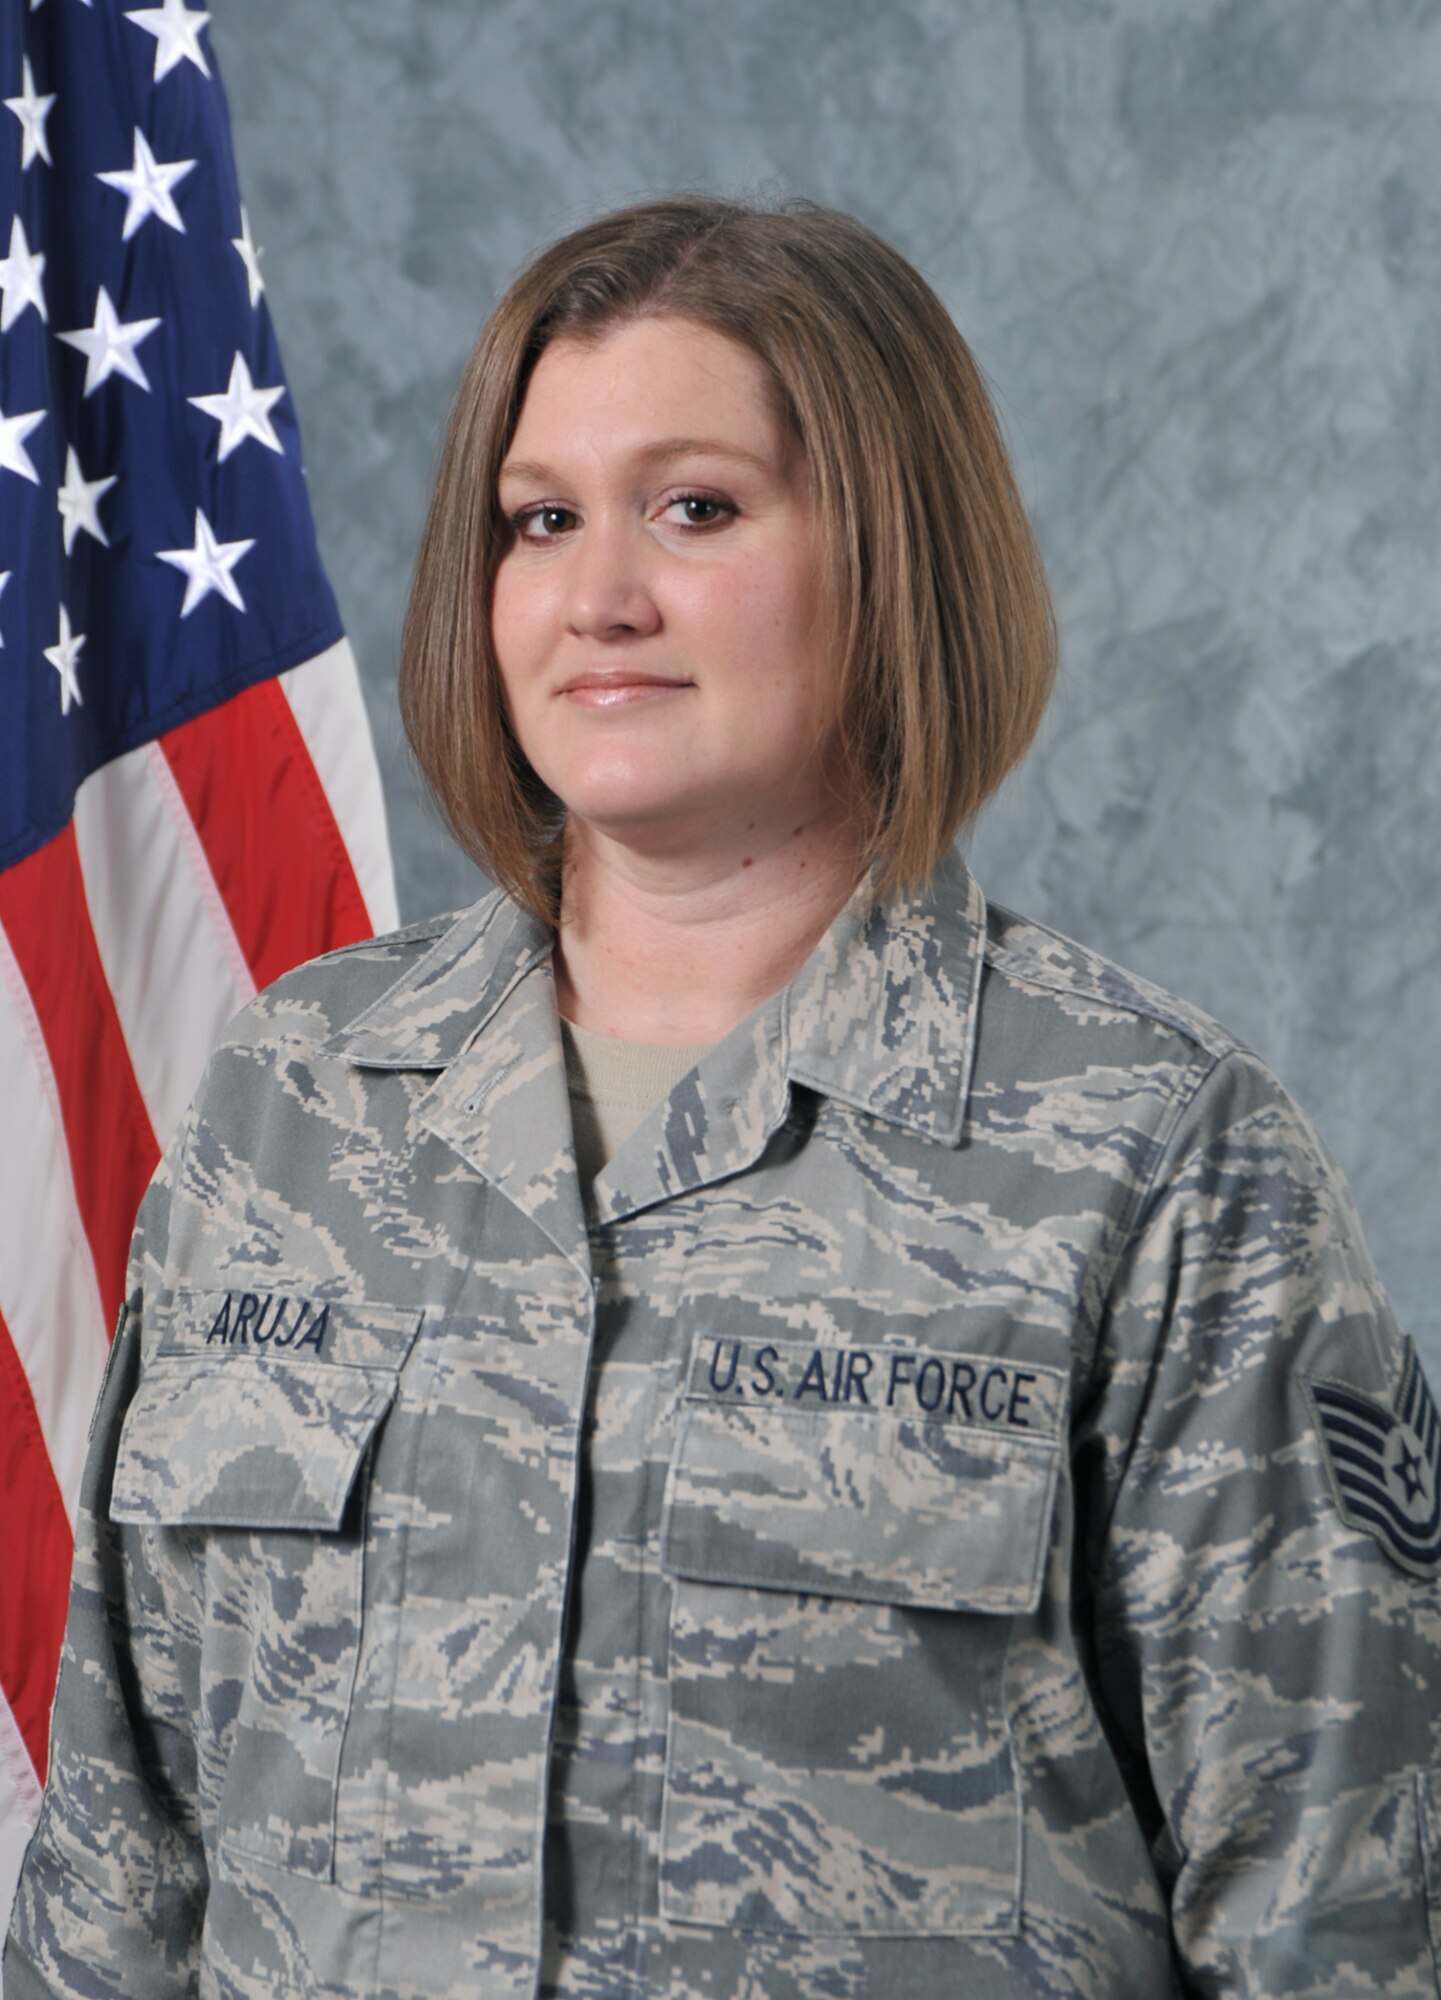 Tech. Sgt. Elizabeth Aruja completed Victim Advocate training at McChord Air Force Base, Wash., in 2006 and continued volunteering as a VA when after arriving at Beale in 2008.  She is the on-call VA for a week two times per month, attends court cases with victims, gives sexual assault briefings, and teaches Rape Aggression Defense training.  Aruja became a VA because she wanted to ensure each Airman receives the services, support, and information they need in a respectful and safe atmosphere. (U.S. Air Force photo)